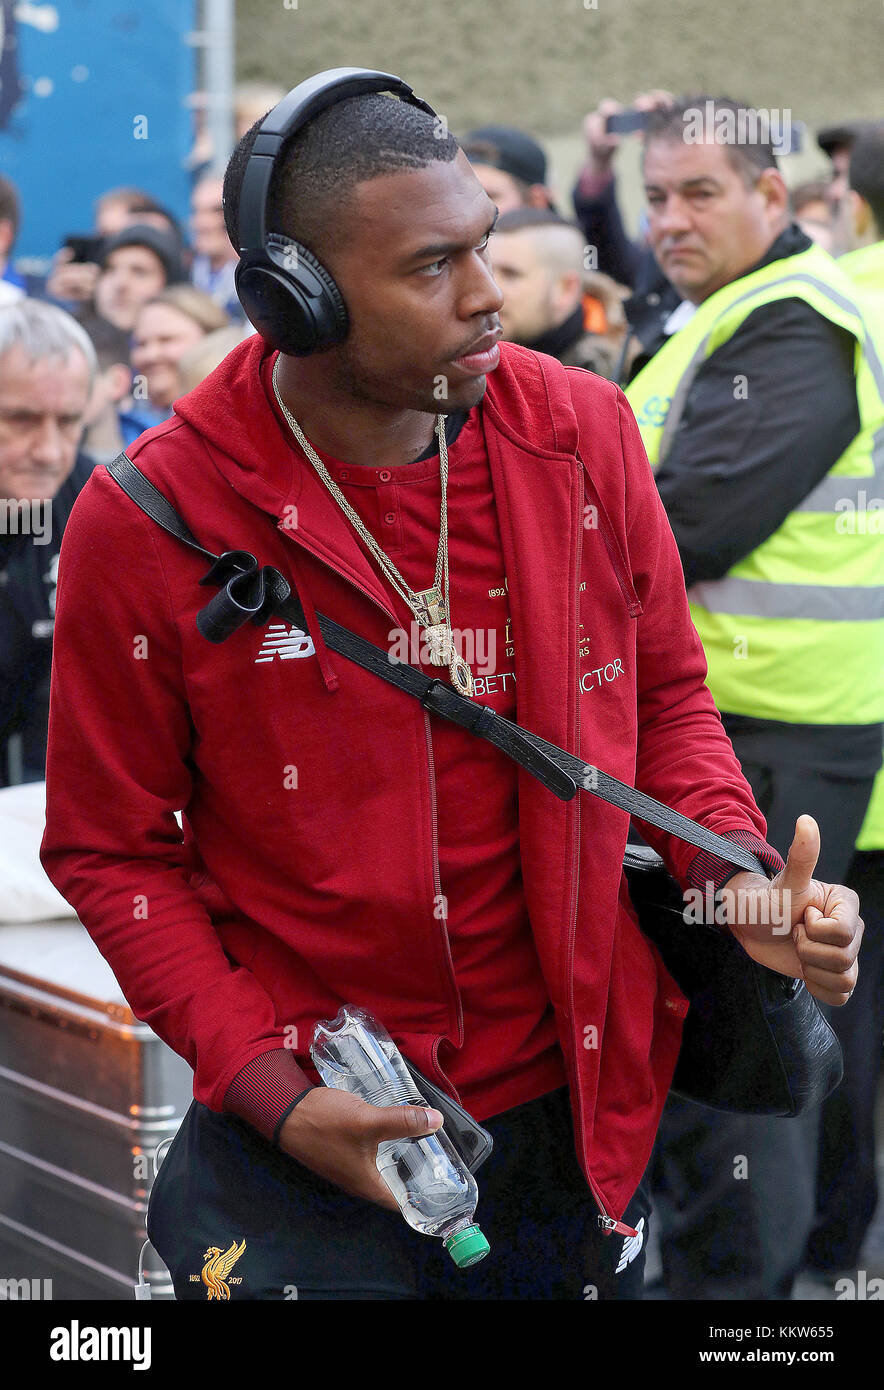 Liverpool's Daniel Sturridge arriving before the Premier League match at the AMEX Stadium, Brighton. PRESS ASSOCIATION Photo Picture date: Saturday December 2, 2017. See PA story SOCCER Brighton. Photo credit should read: Gareth Fuller/PA Wire. RESTRICTIONS: No use with unauthorised audio, video, data, fixture lists, club/league logos or 'live' services. Online in-match use limited to 75 images, no video emulation. No use in betting, games or single club/league/player publications. Stock Photo